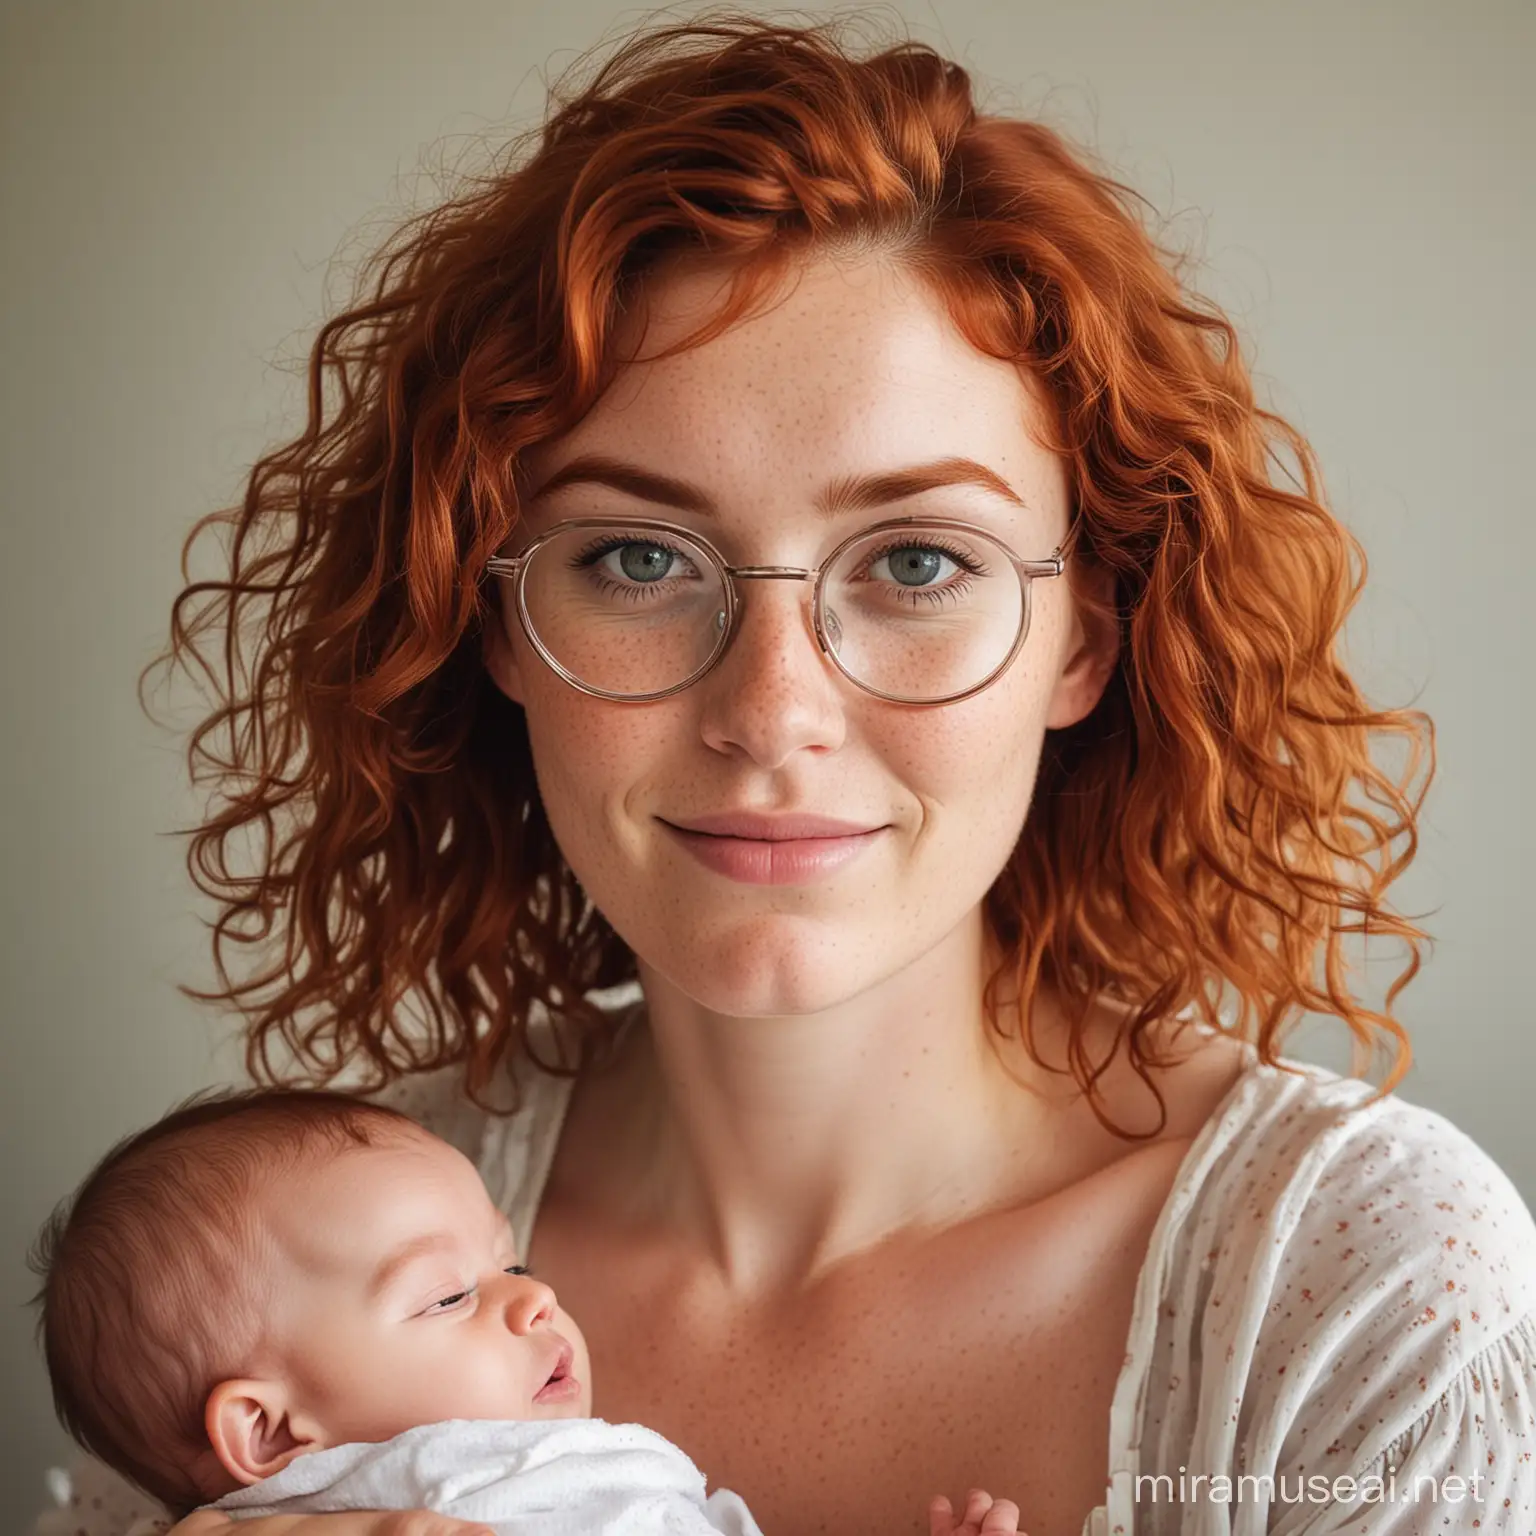 Young Mother with Glasses and Freckles Nursing a Baby